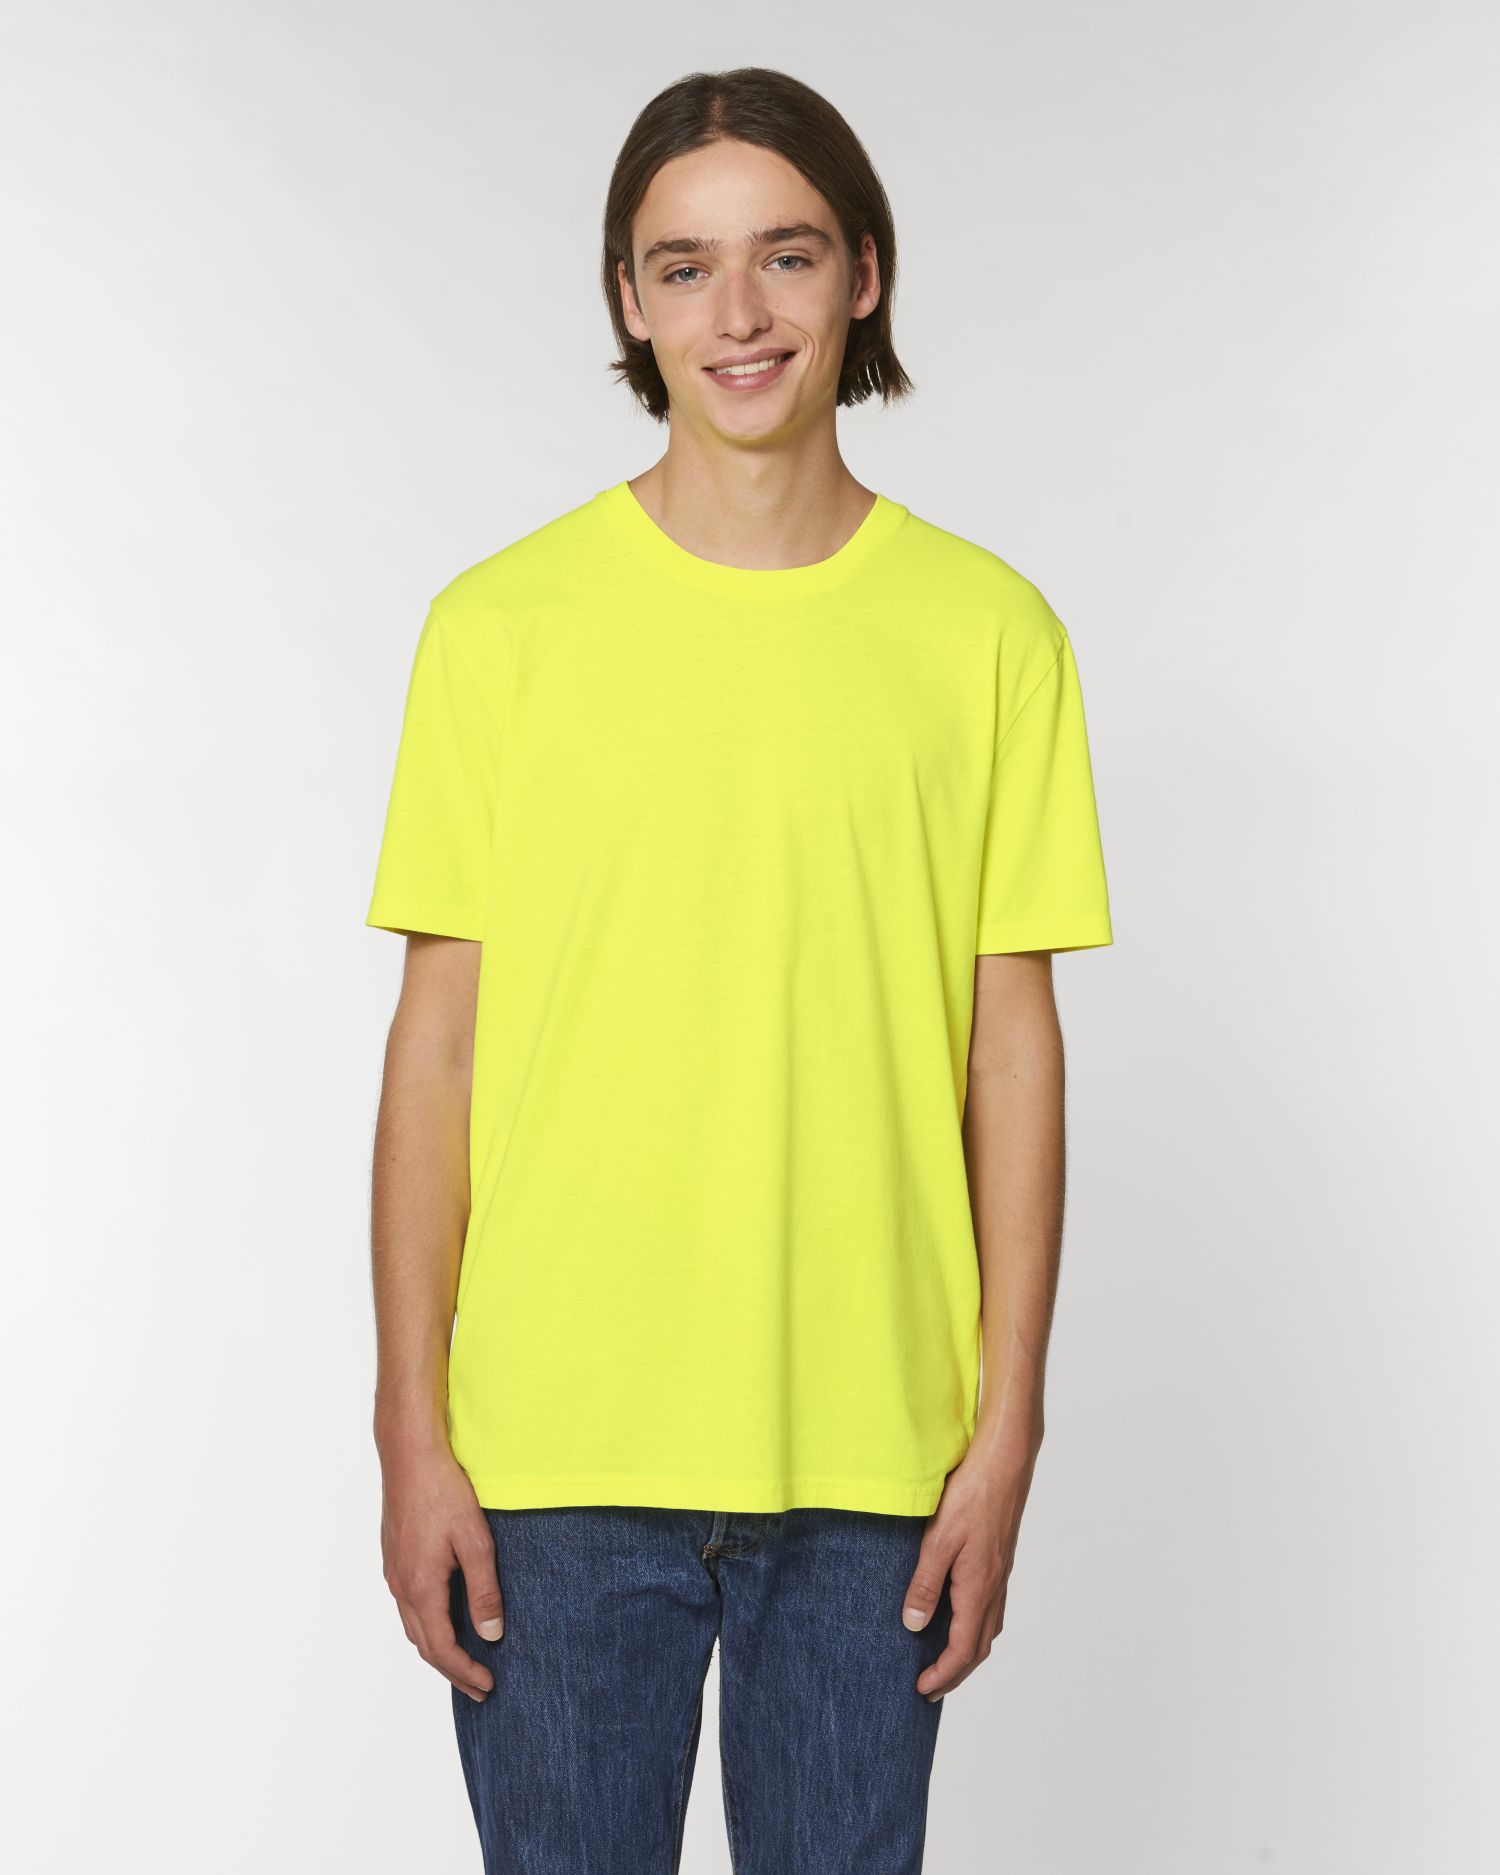 T-Shirt Creator Vintage in Farbe G. Dyed Fluo Lemonade Fizz